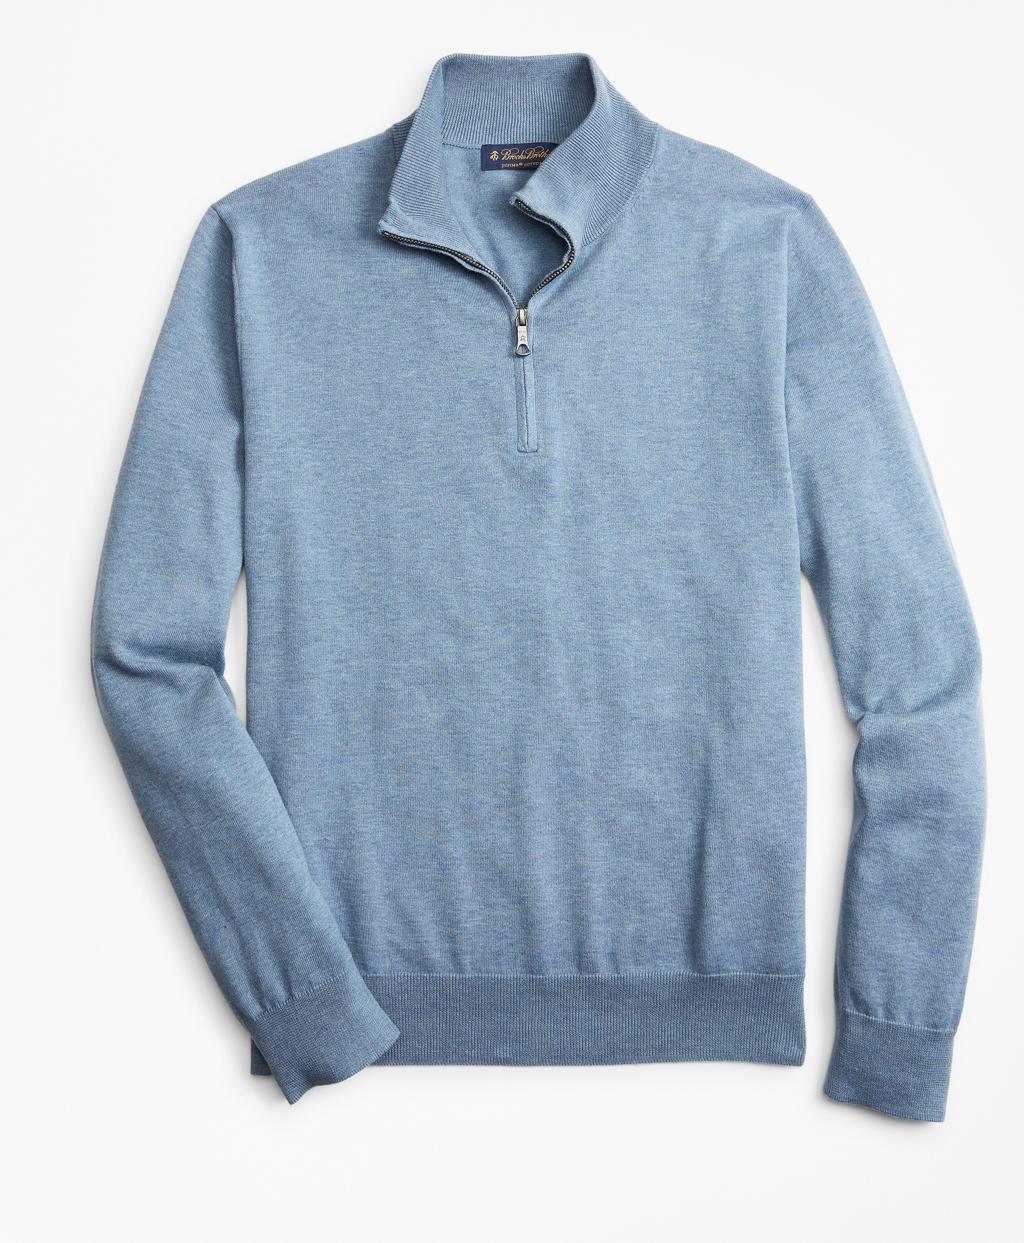 Brooks Brothers Supima Cotton Half-zip Sweater in Blue for Men - Lyst